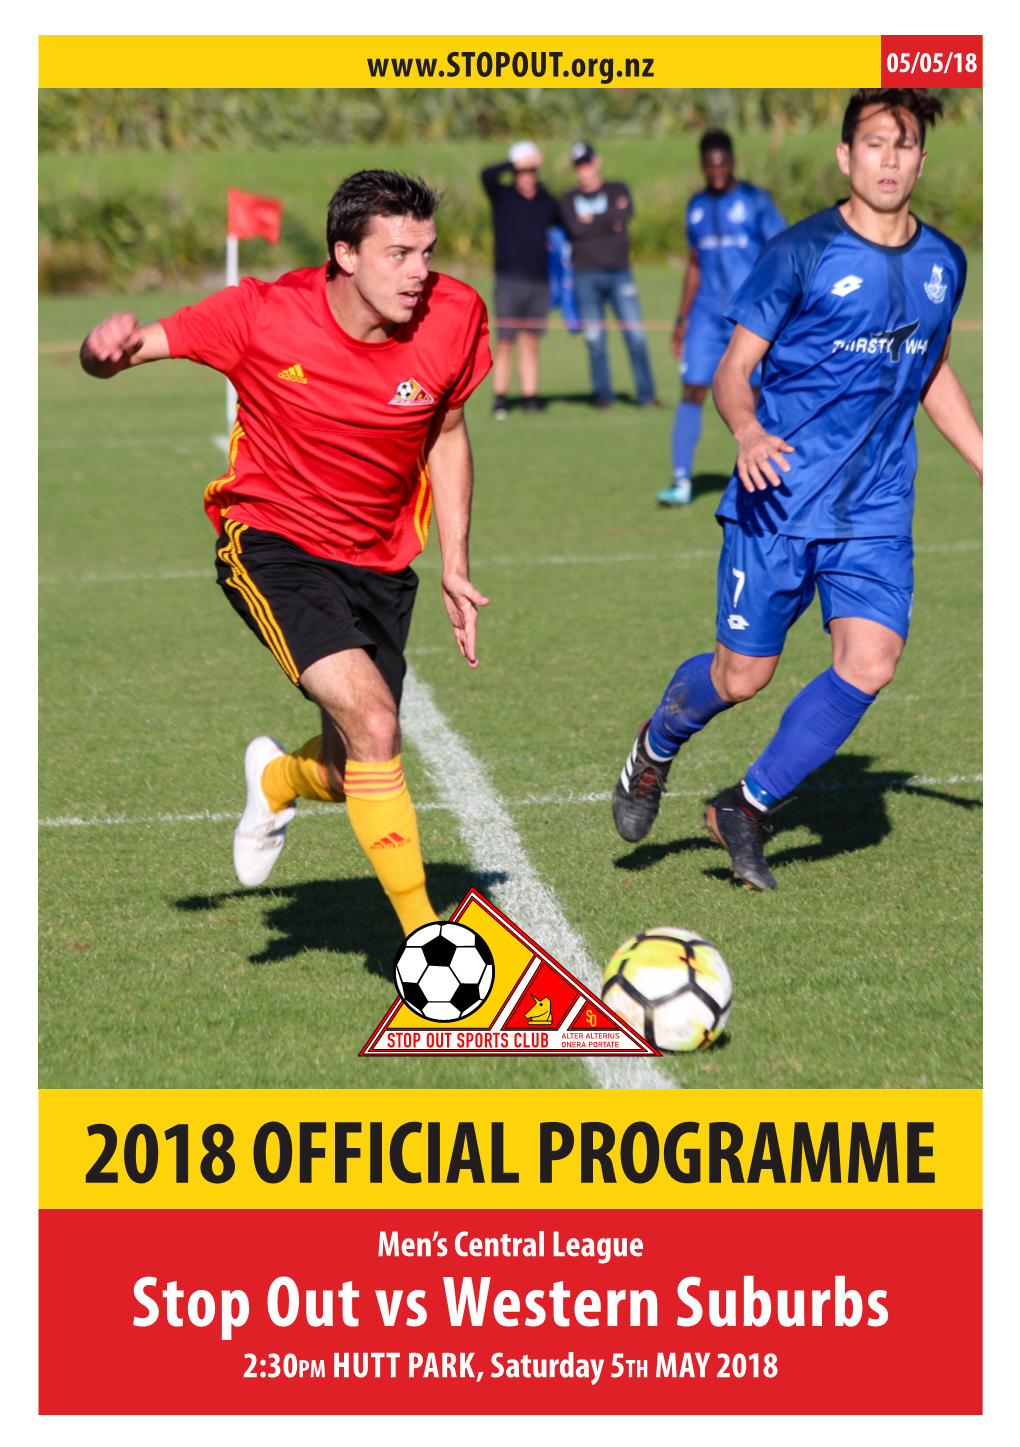 2018 OFFICIAL PROGRAMME Men’S Central League Stop out Vs Western Suburbs 2:30Pm HUTT PARK, Saturday 5Th MAY 2018 FOOTBALL for ALL